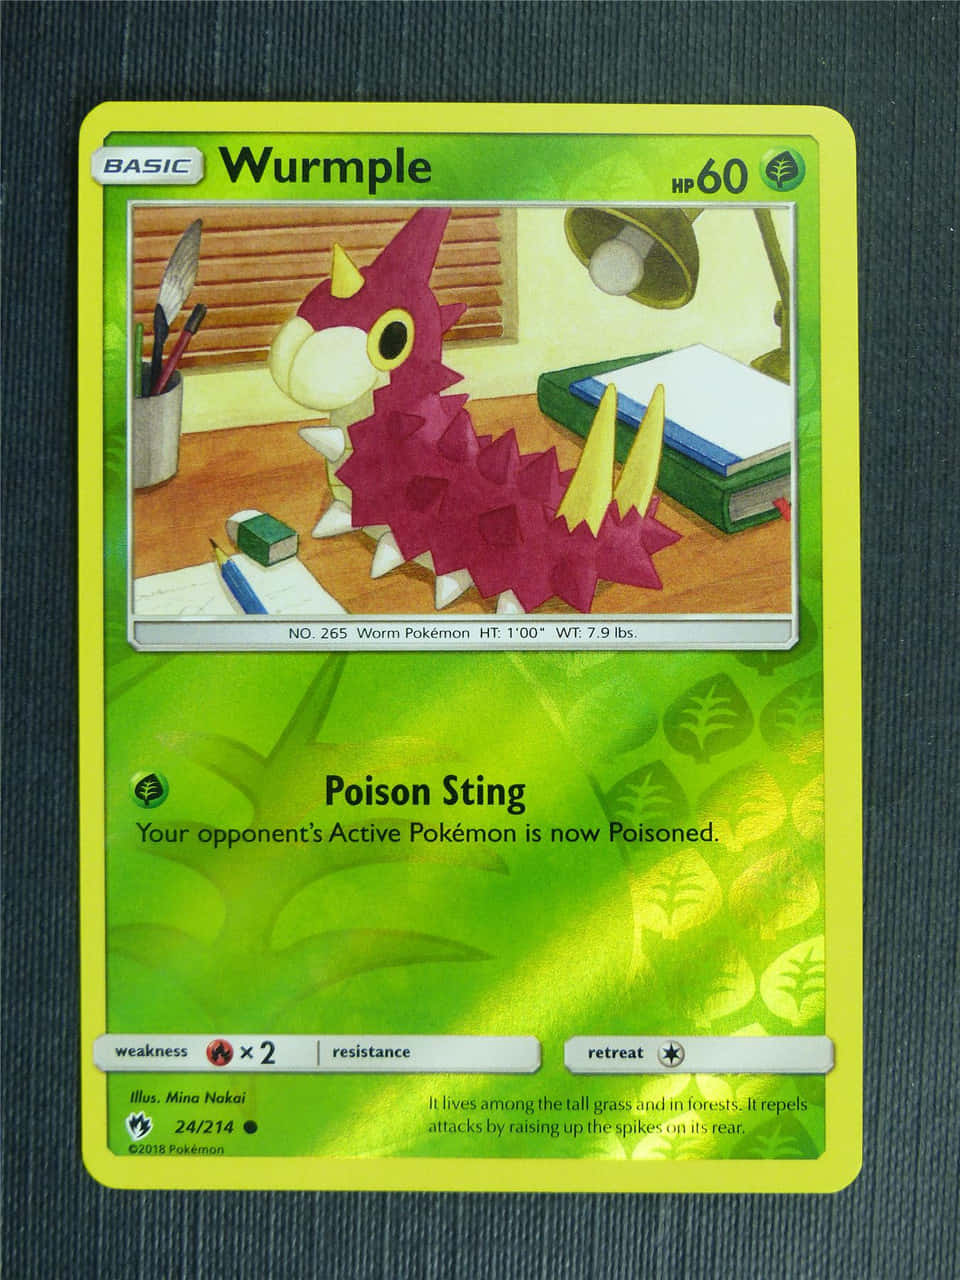 Poison Sting Card Of Wurmple Wallpaper